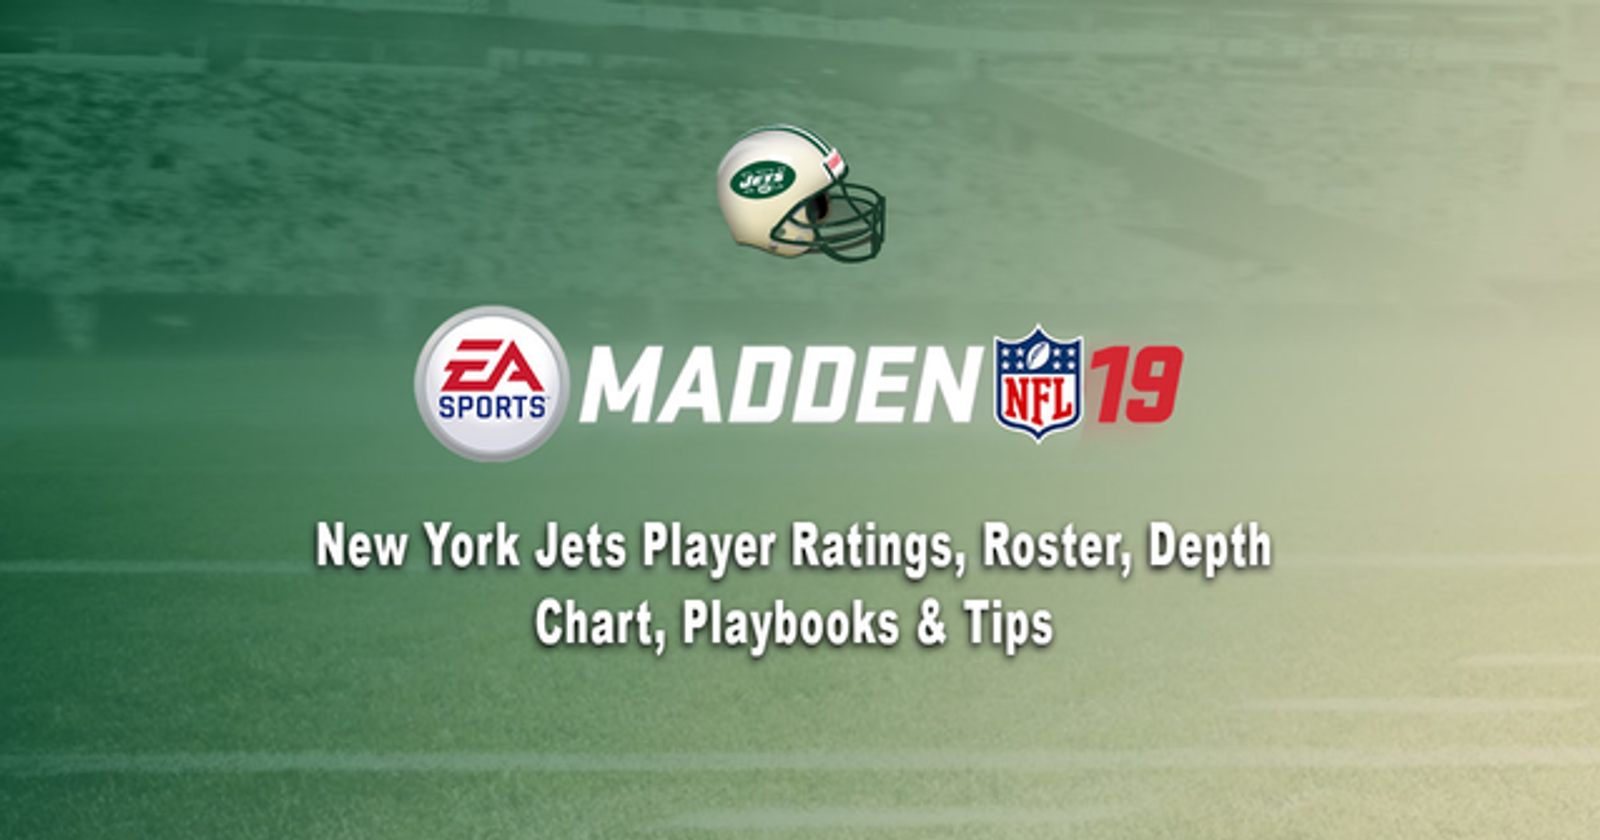 Madden 19: New York Jets Player Ratings, Roster, Depth Chart & Playbooks